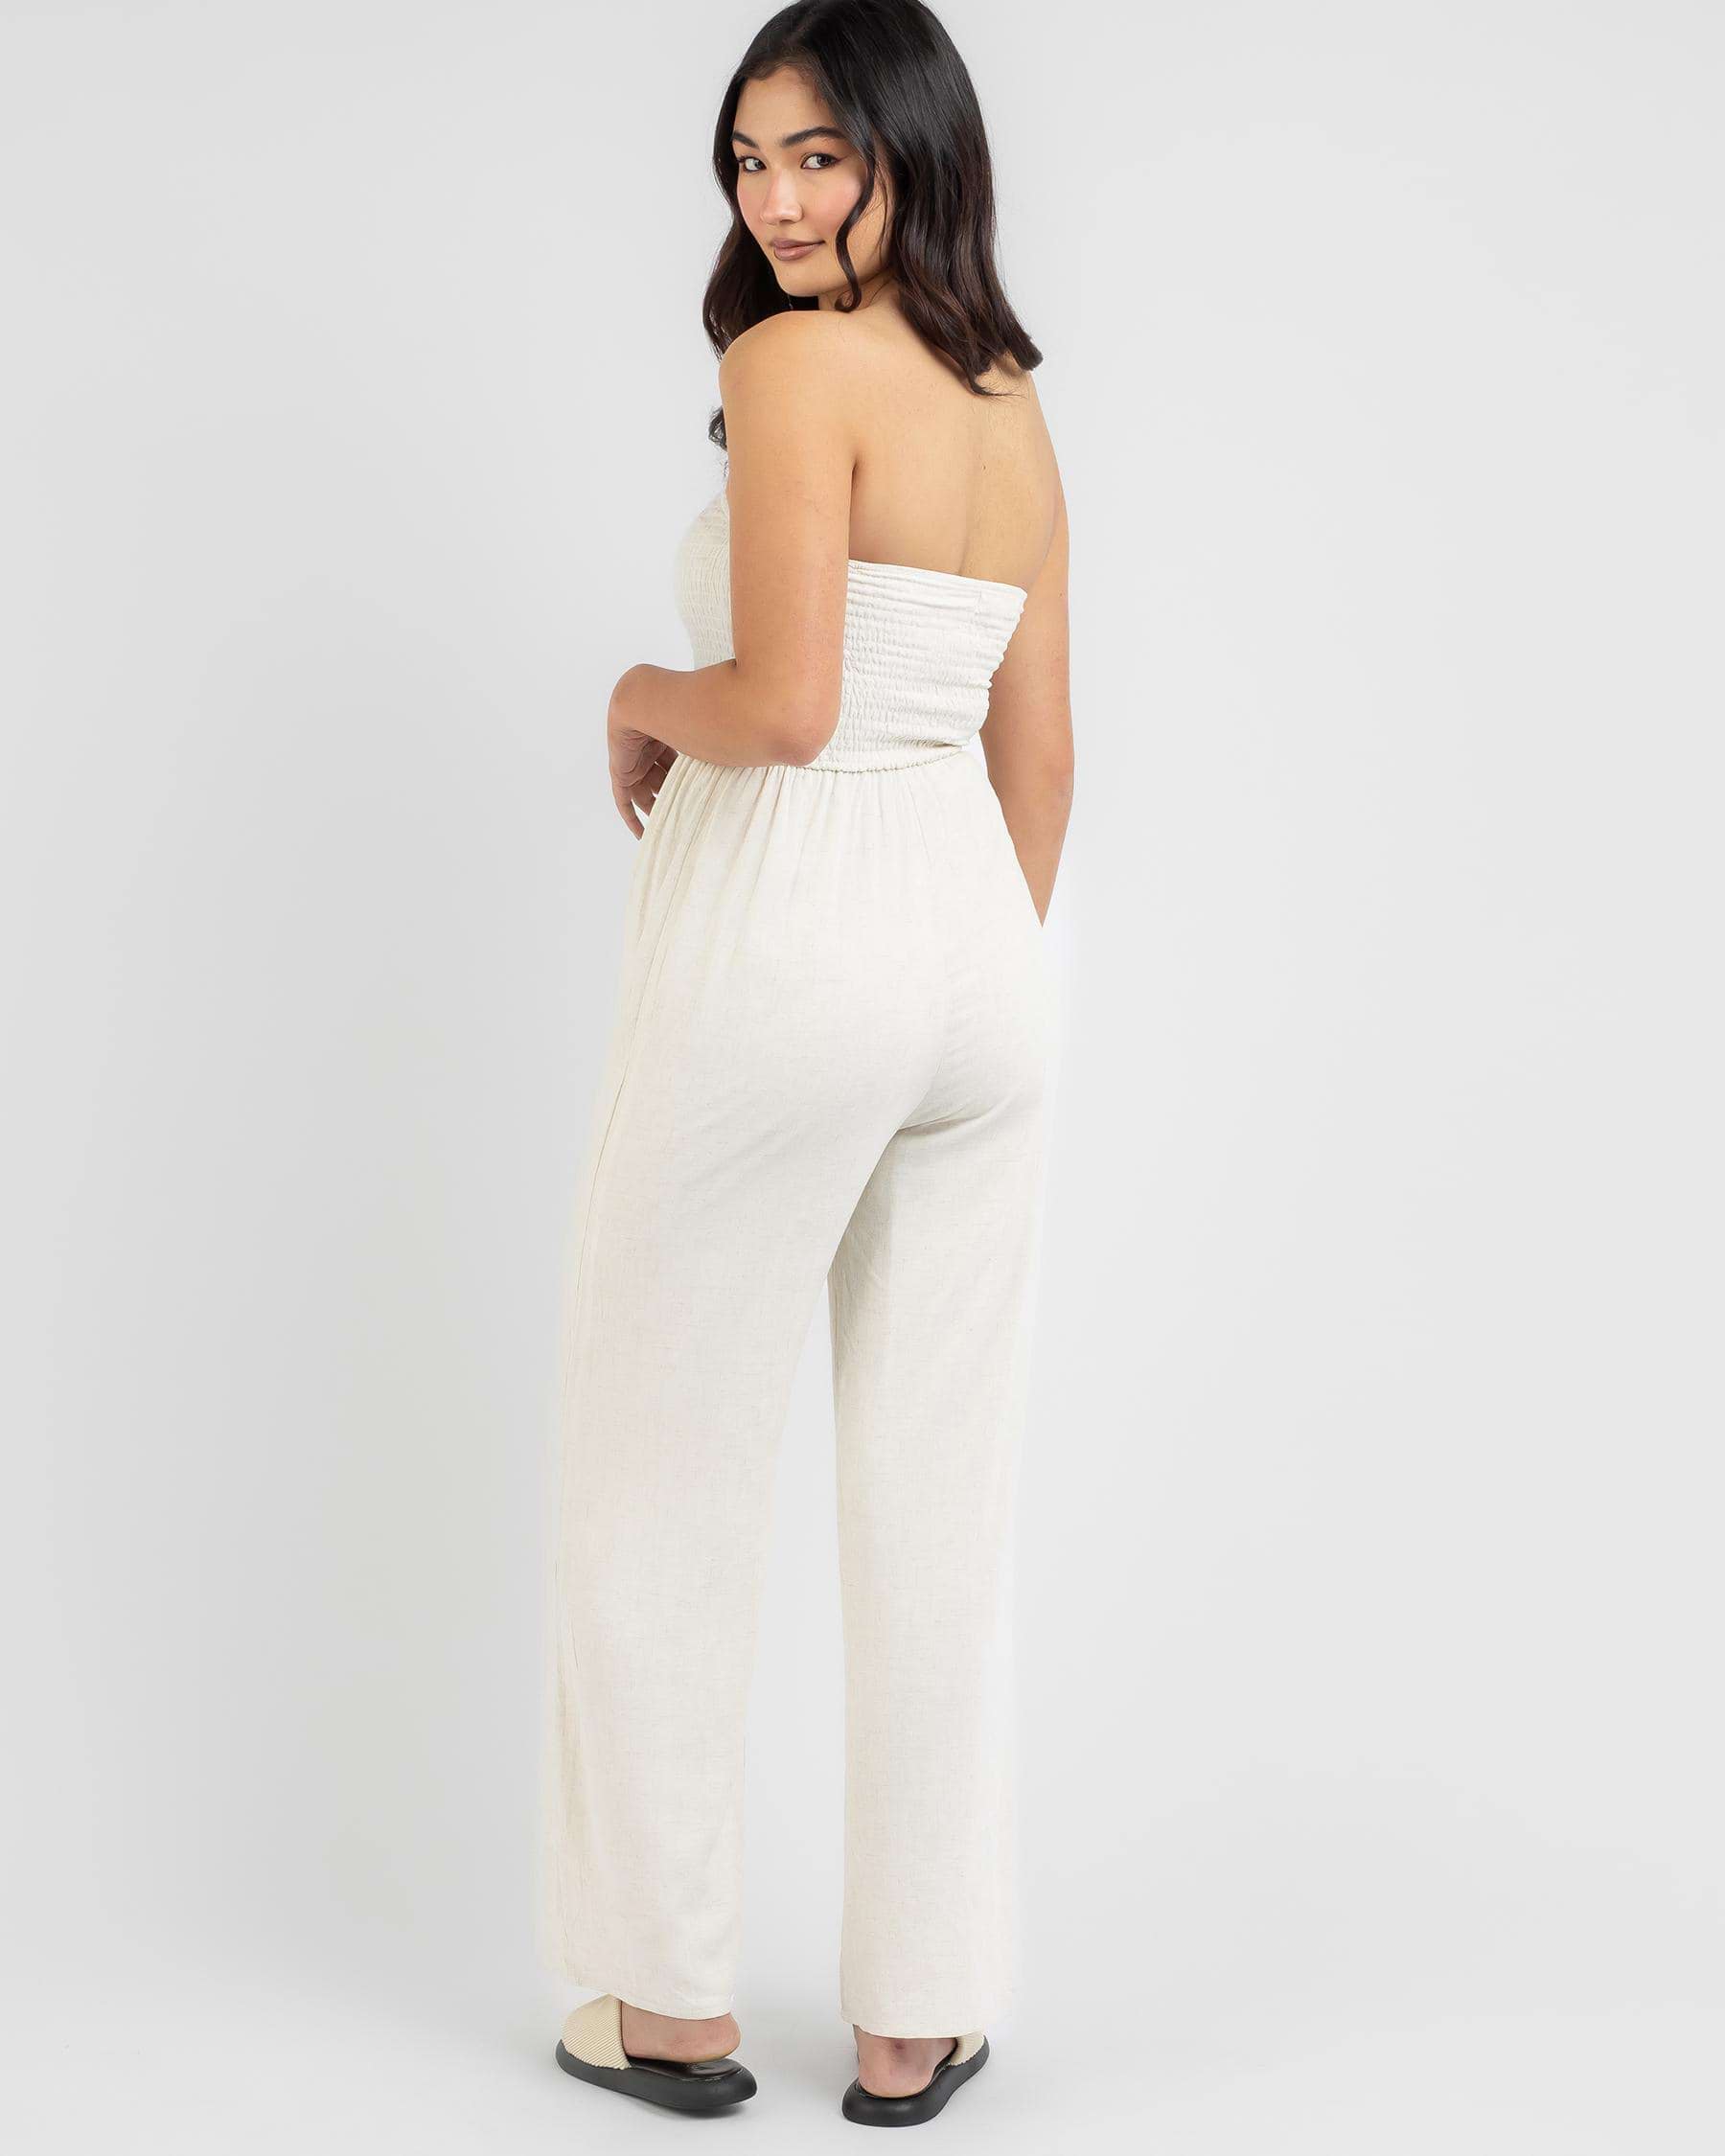 Mooloola Phoebe Jumpsuit In Natural S+p - Fast Shipping & Easy Returns ...